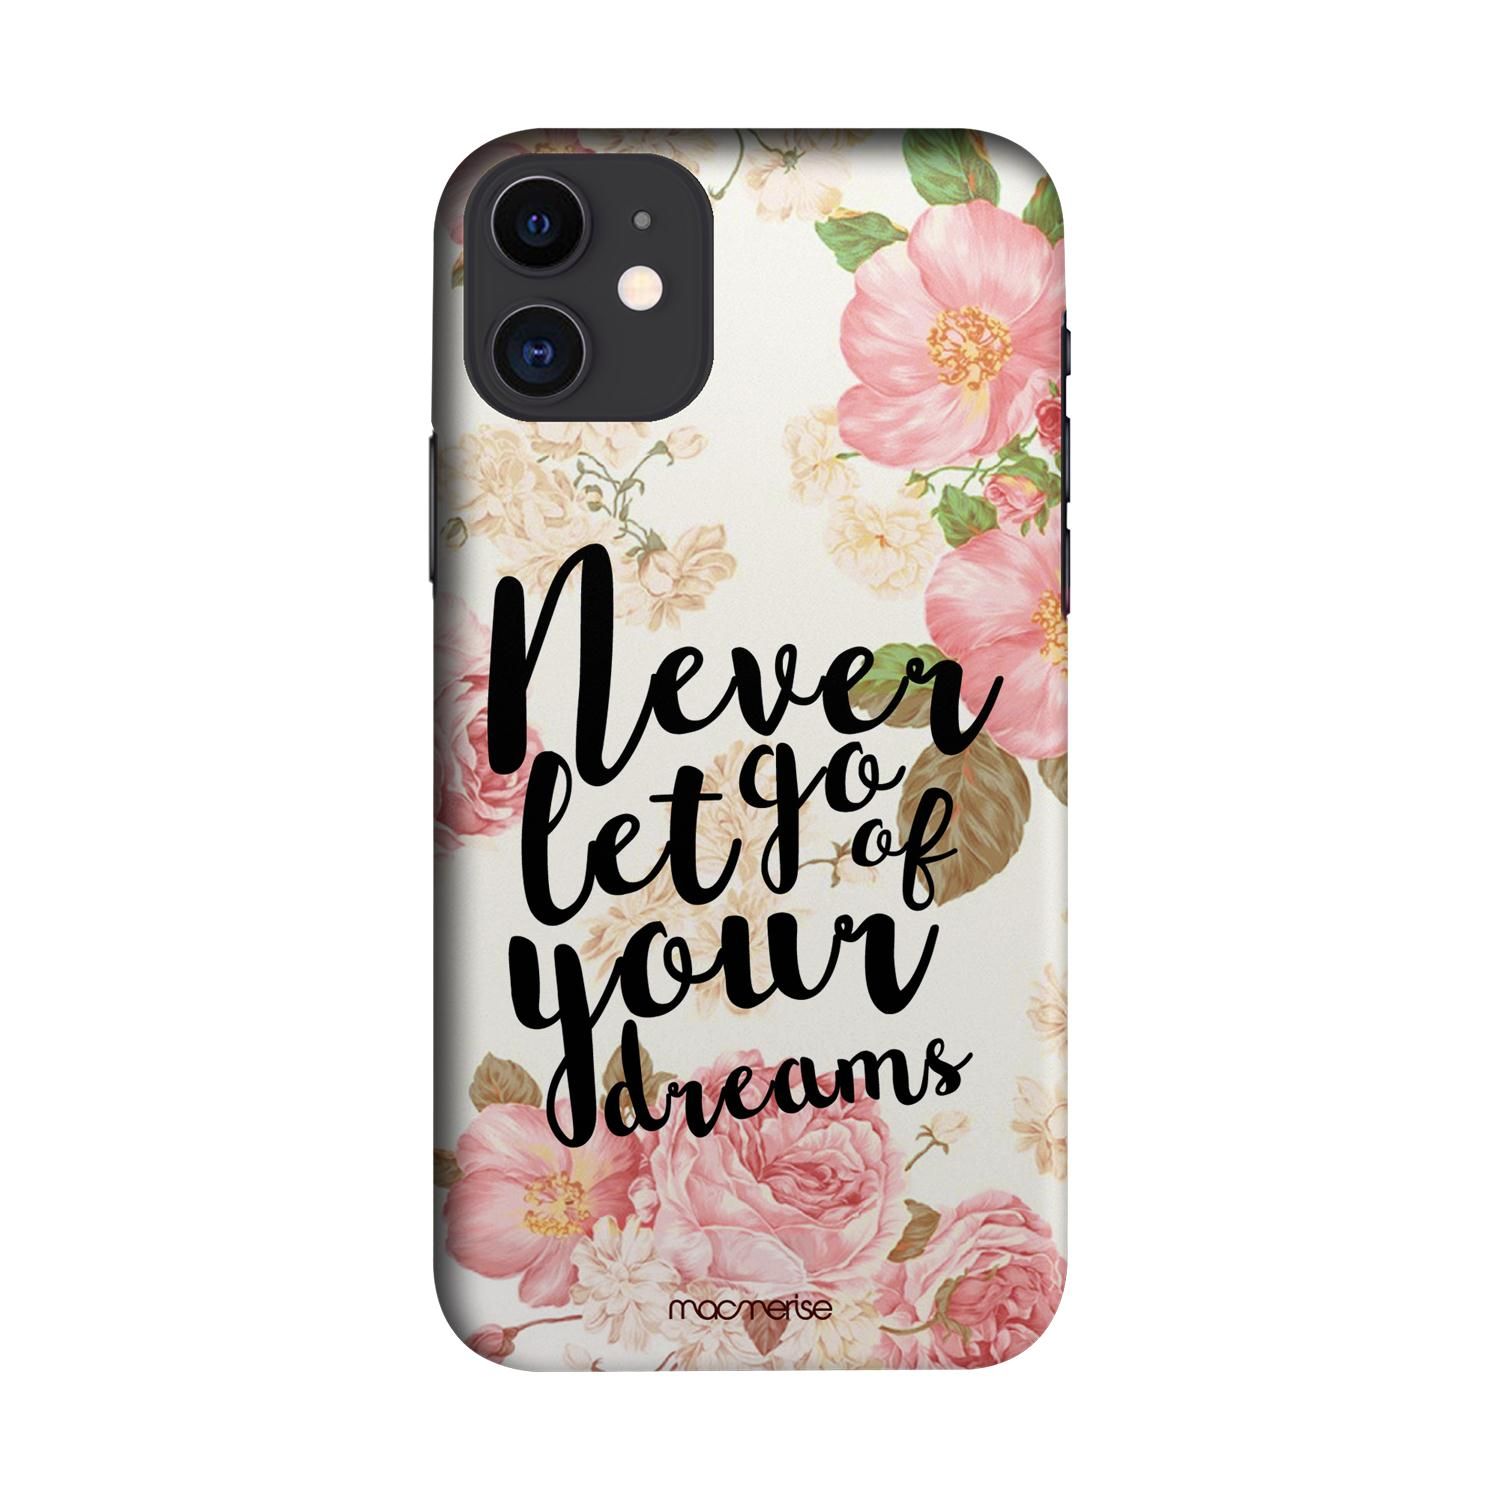 Buy Your Dreams - Sleek Phone Case for iPhone 11 Online